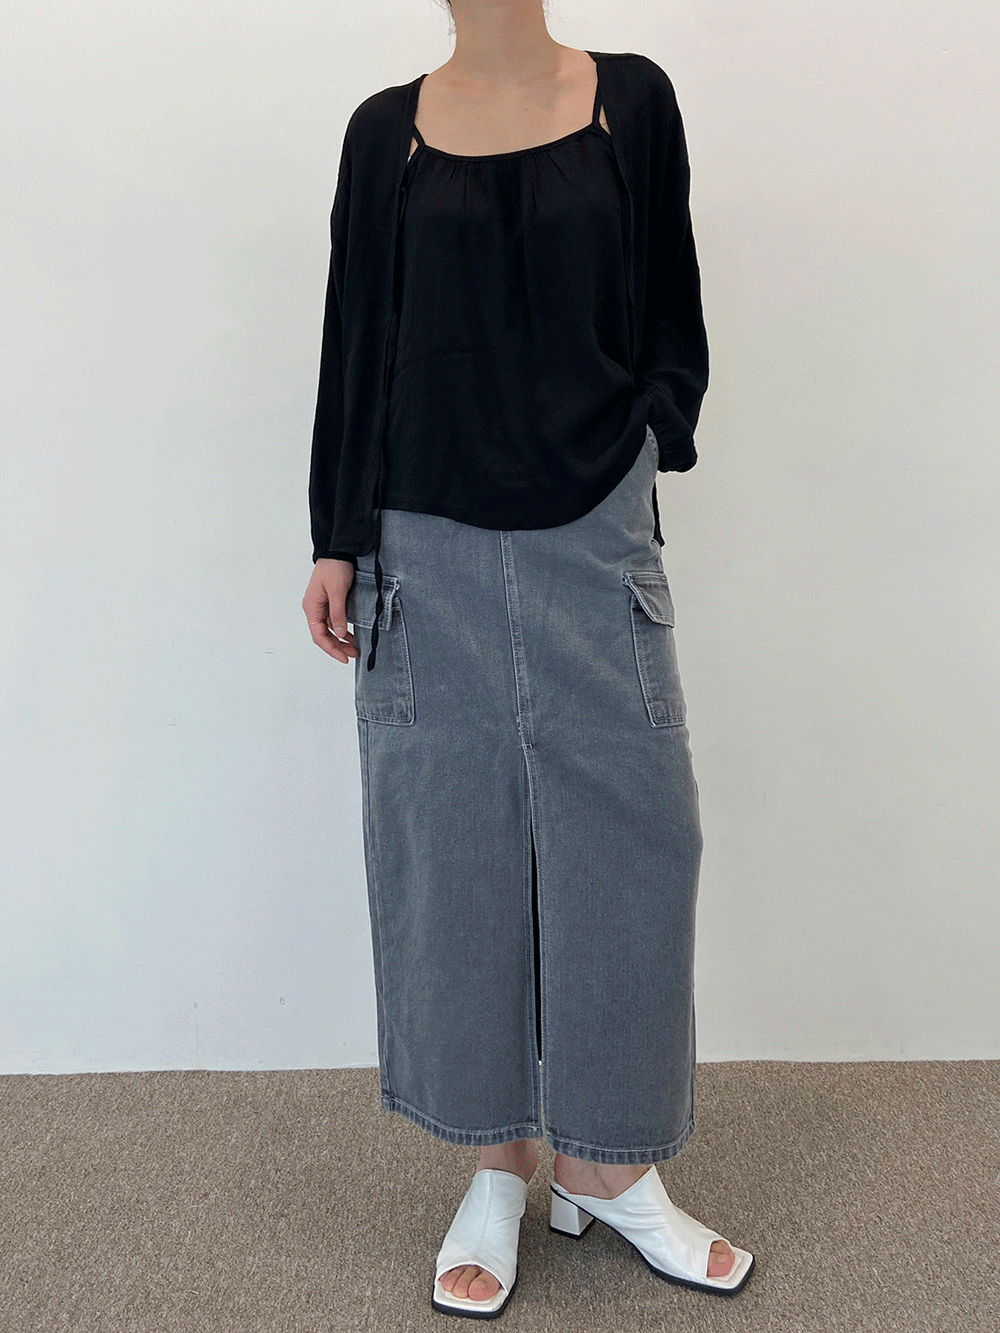 Slit Cargo Skirts (ONLY SMALL)